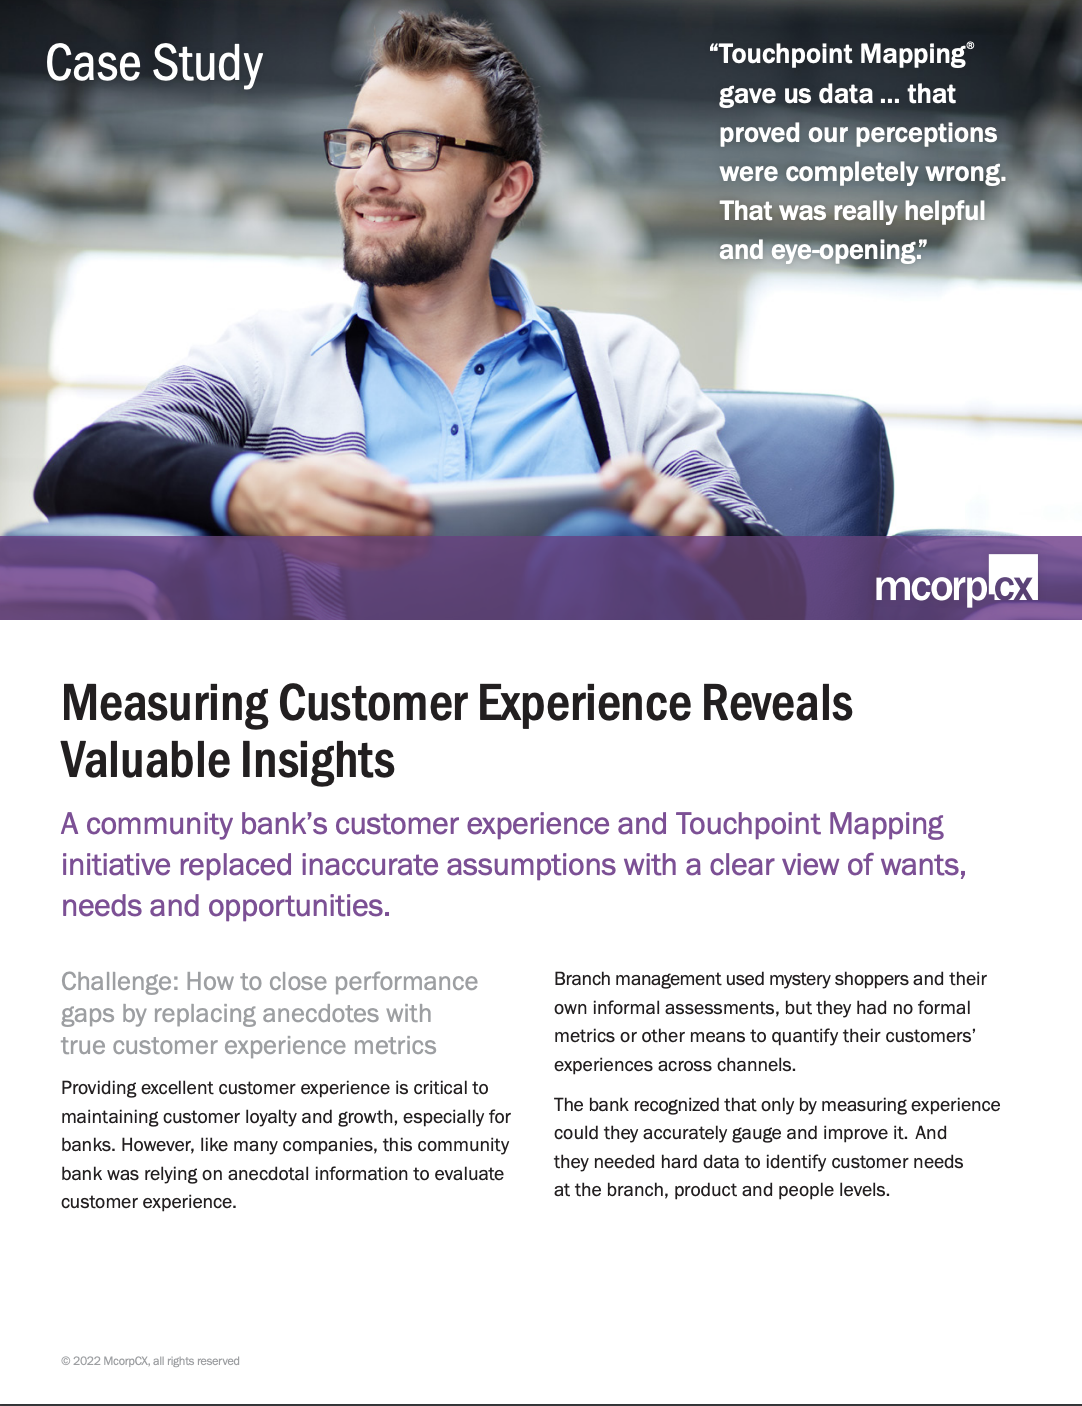 Measuring Customer Experience Reveals Valuable Insights